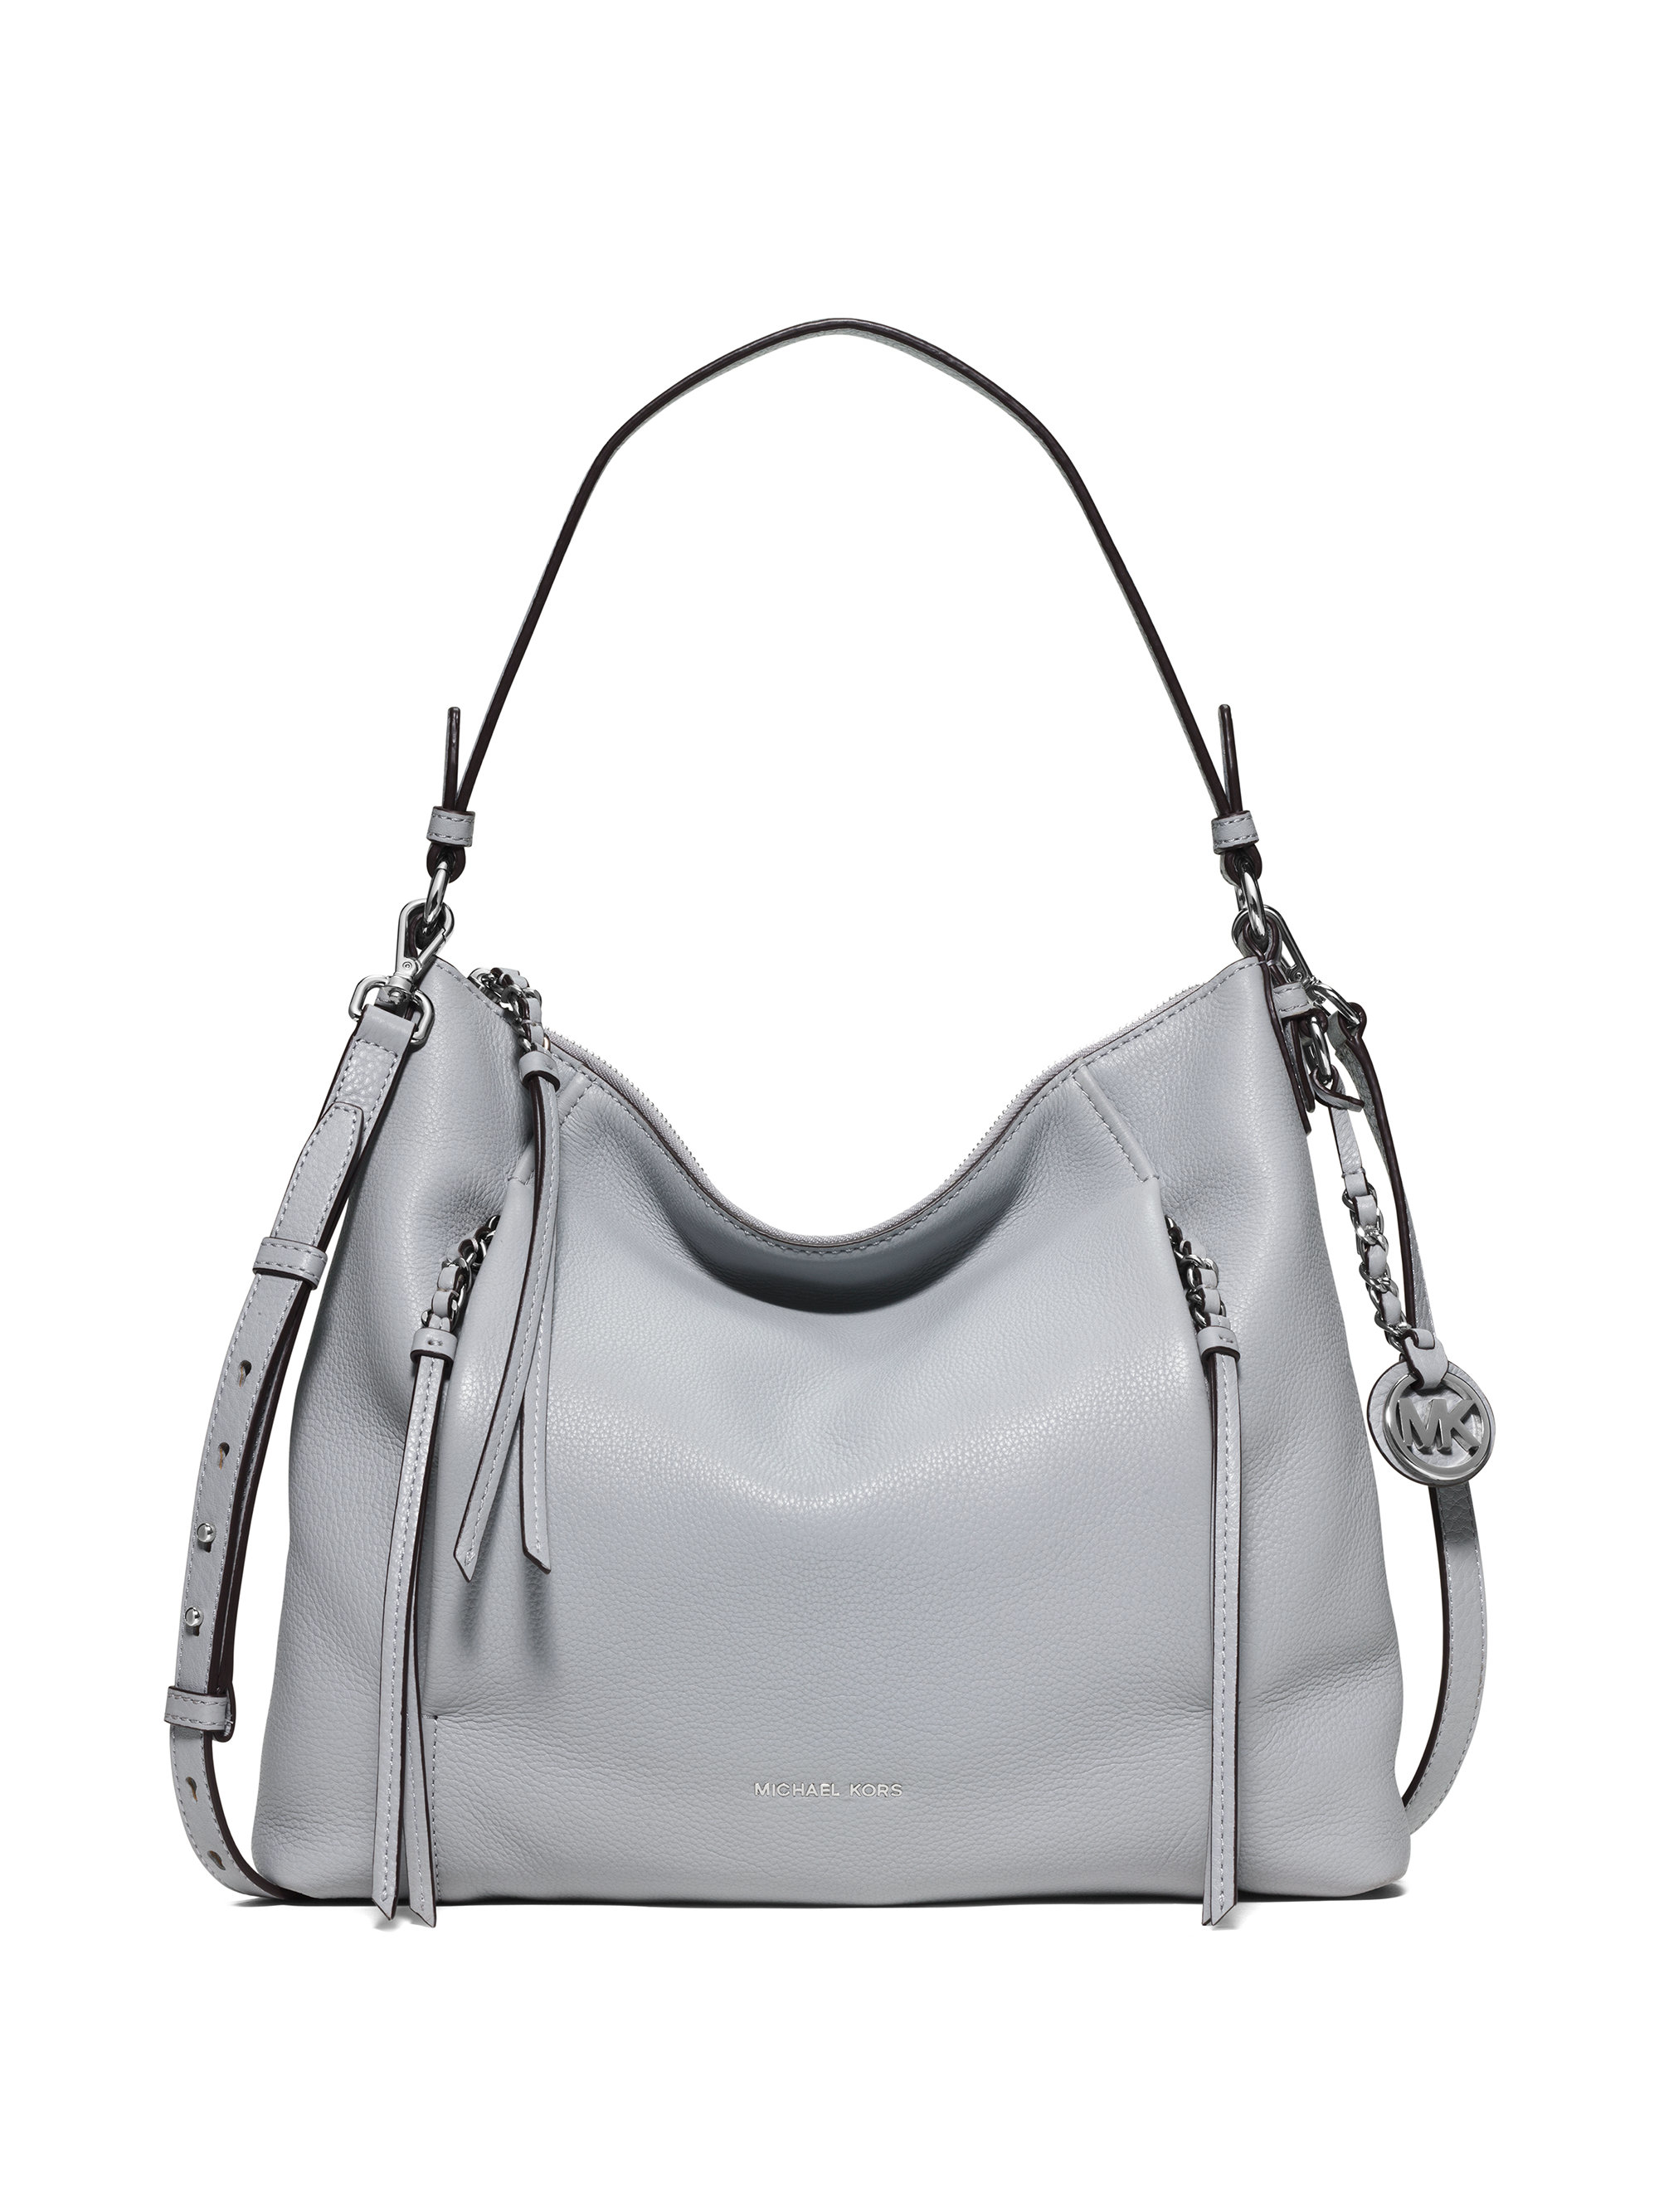 MICHAEL Michael Kors Corinne Large Leather Shoulder Bag in Gray - Lyst